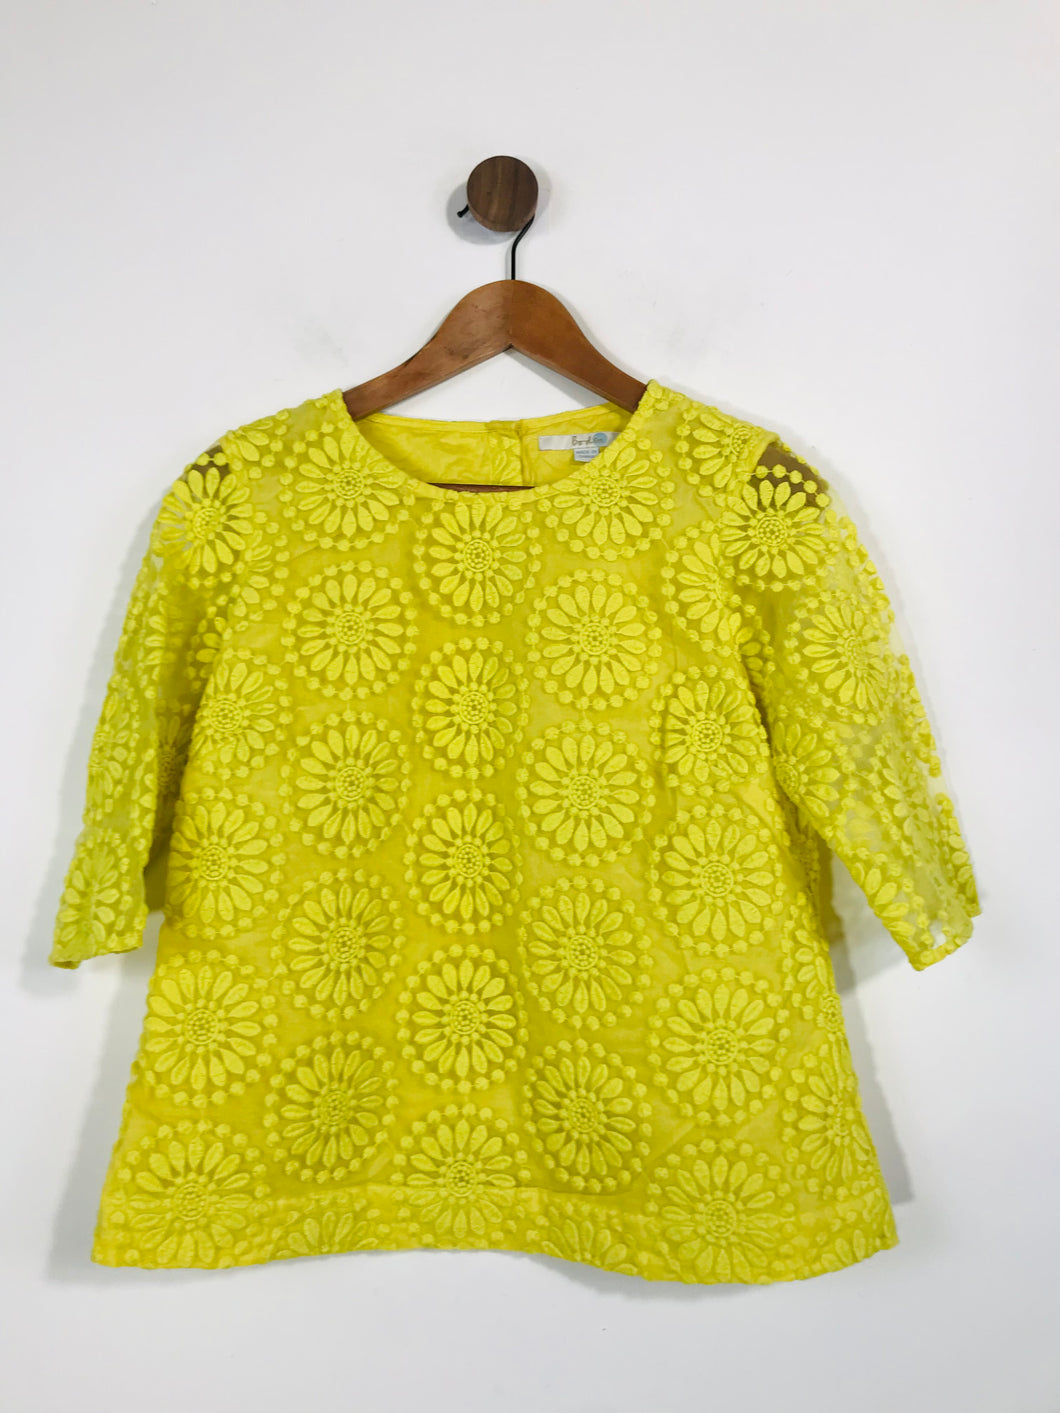 Boden Women's Embroidered Blouse | UK10 | Yellow